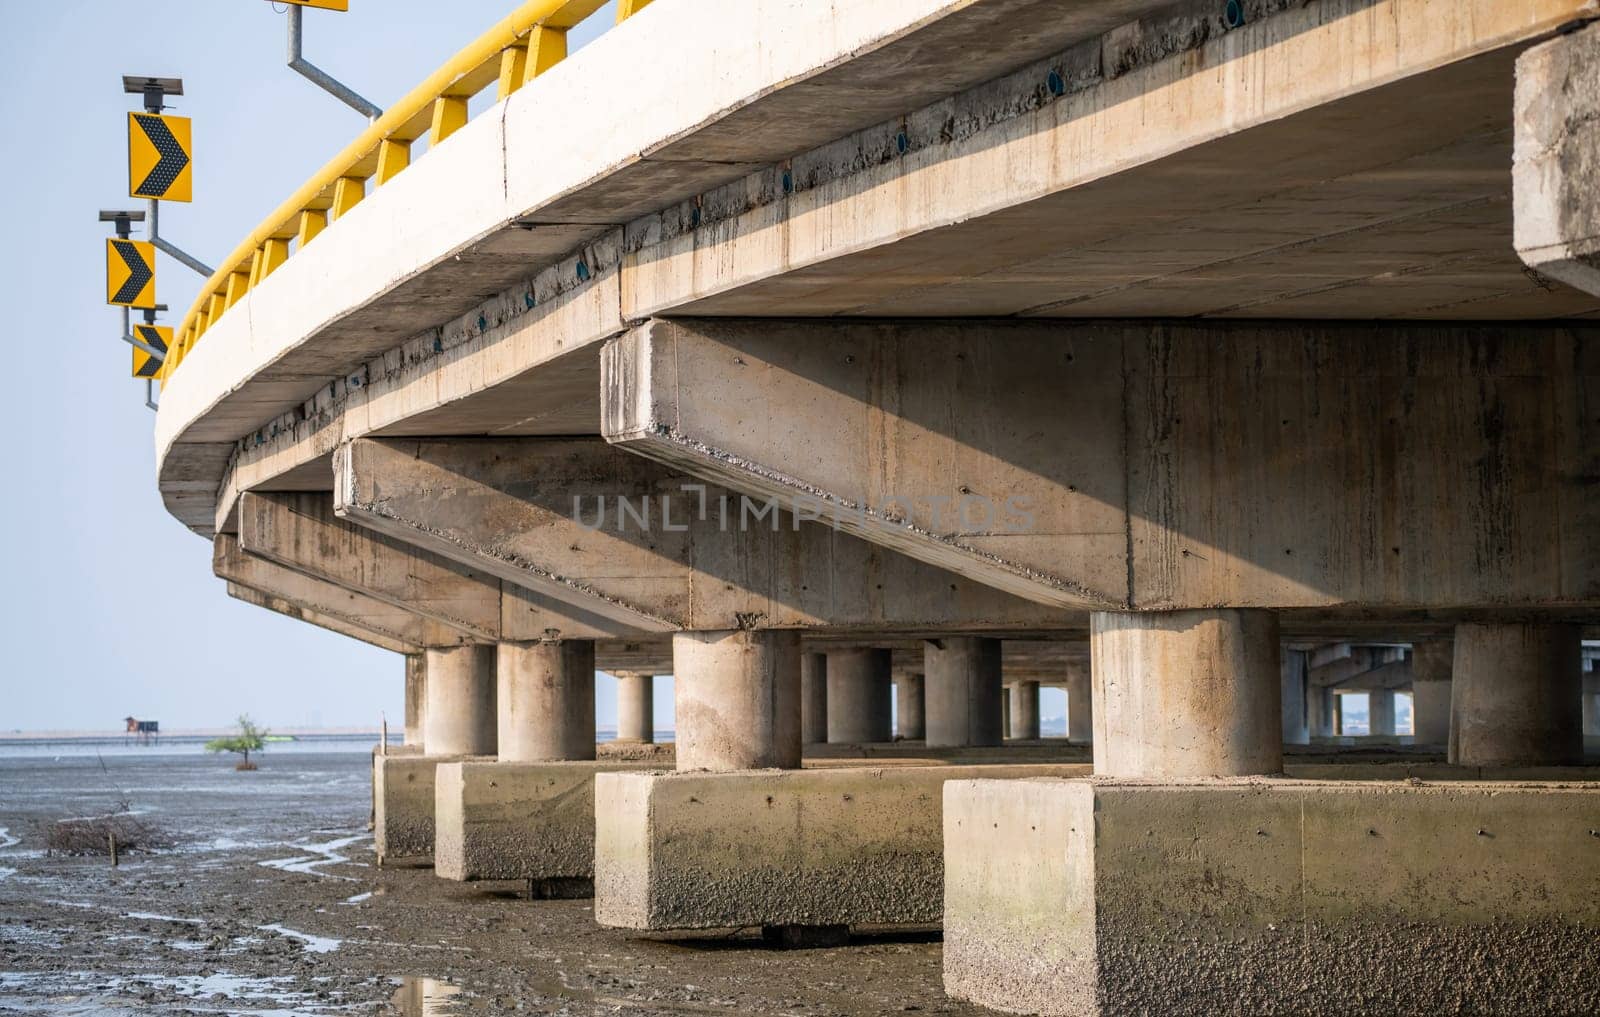 Structure of reinforced concrete bridge along the sea. Bottom view of concrete bridge. Concrete bridge engineering construction. Modern cement bridge with strong column architecture. Infrastructure.